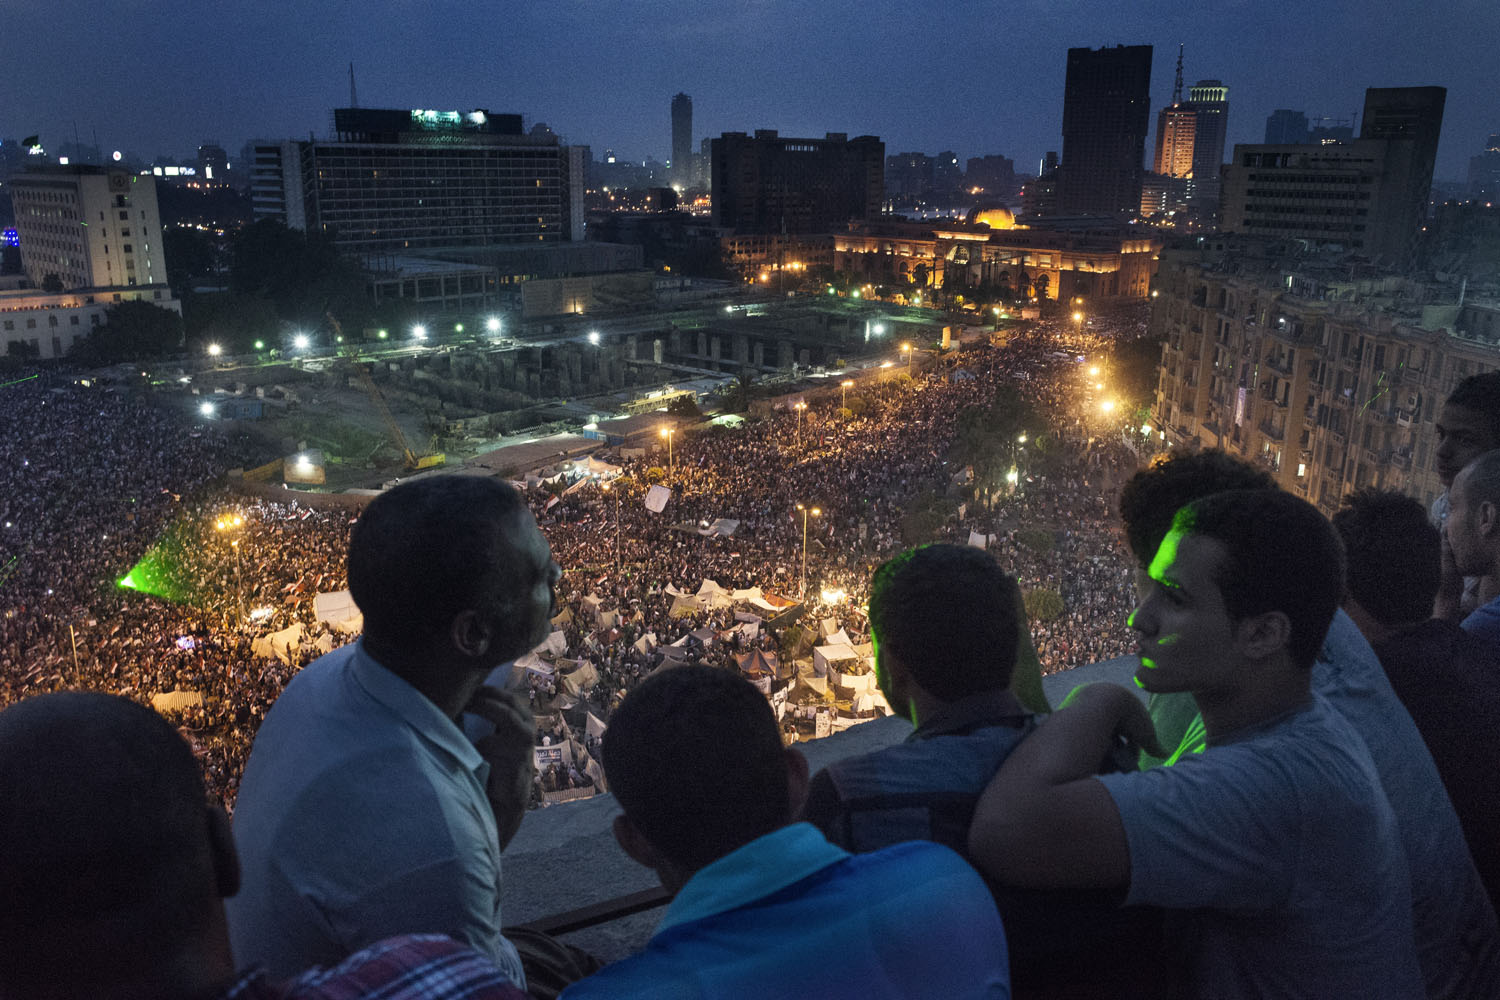 July 3, 2013. People look on as crowds celebrate in Tahrir Square in Cairo,  after Egyptian President Mohamed Morsi is removed from power by the military